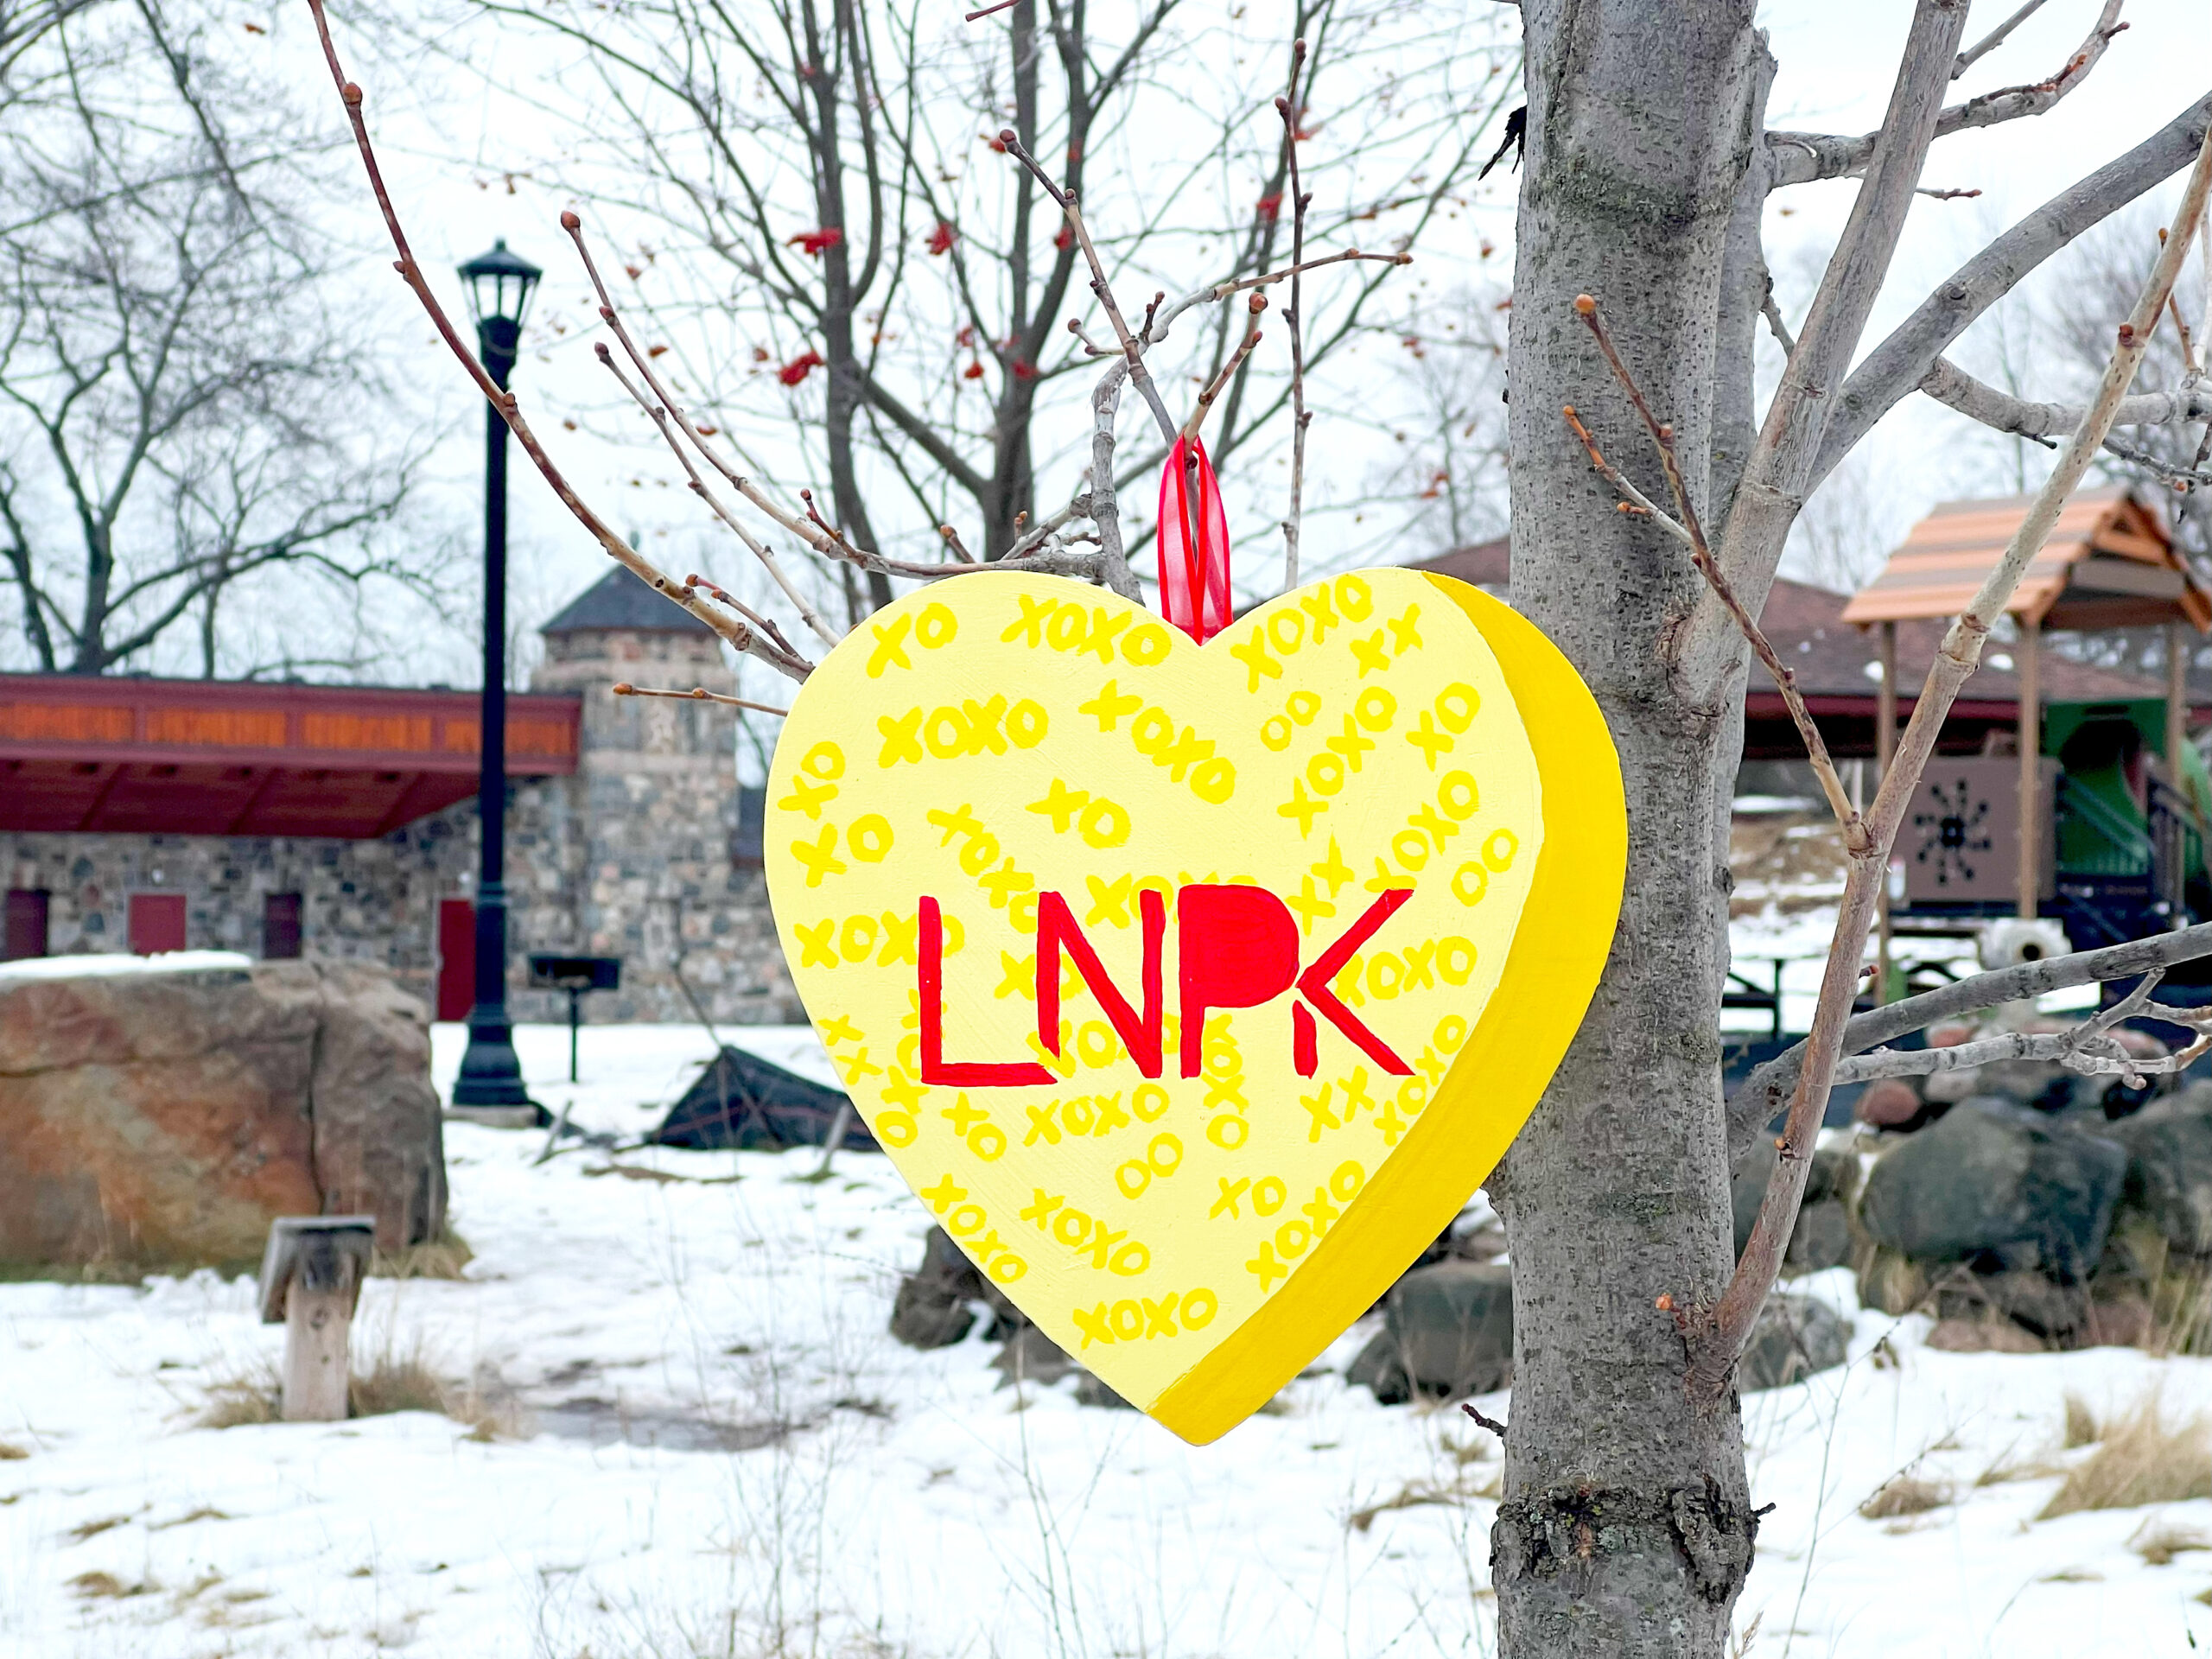 Yellow heart with XOXO pattern and "LNPK" in red hangs on a tree in front of the Lincoln Park pavilion.